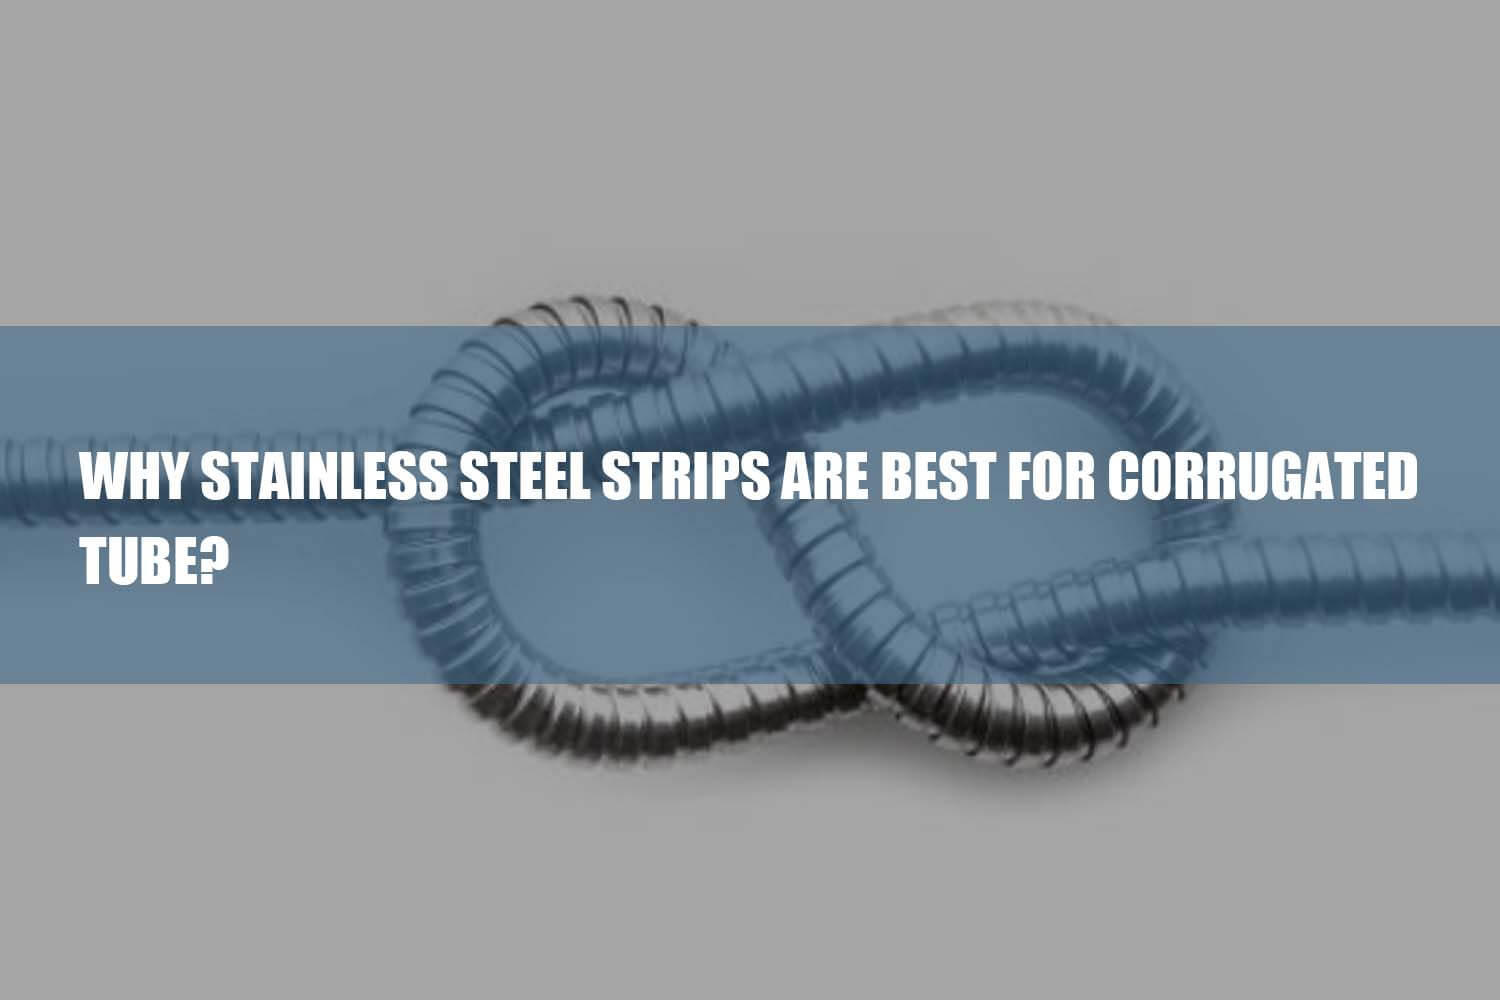 stainless steel strips are best for corrugated tubes